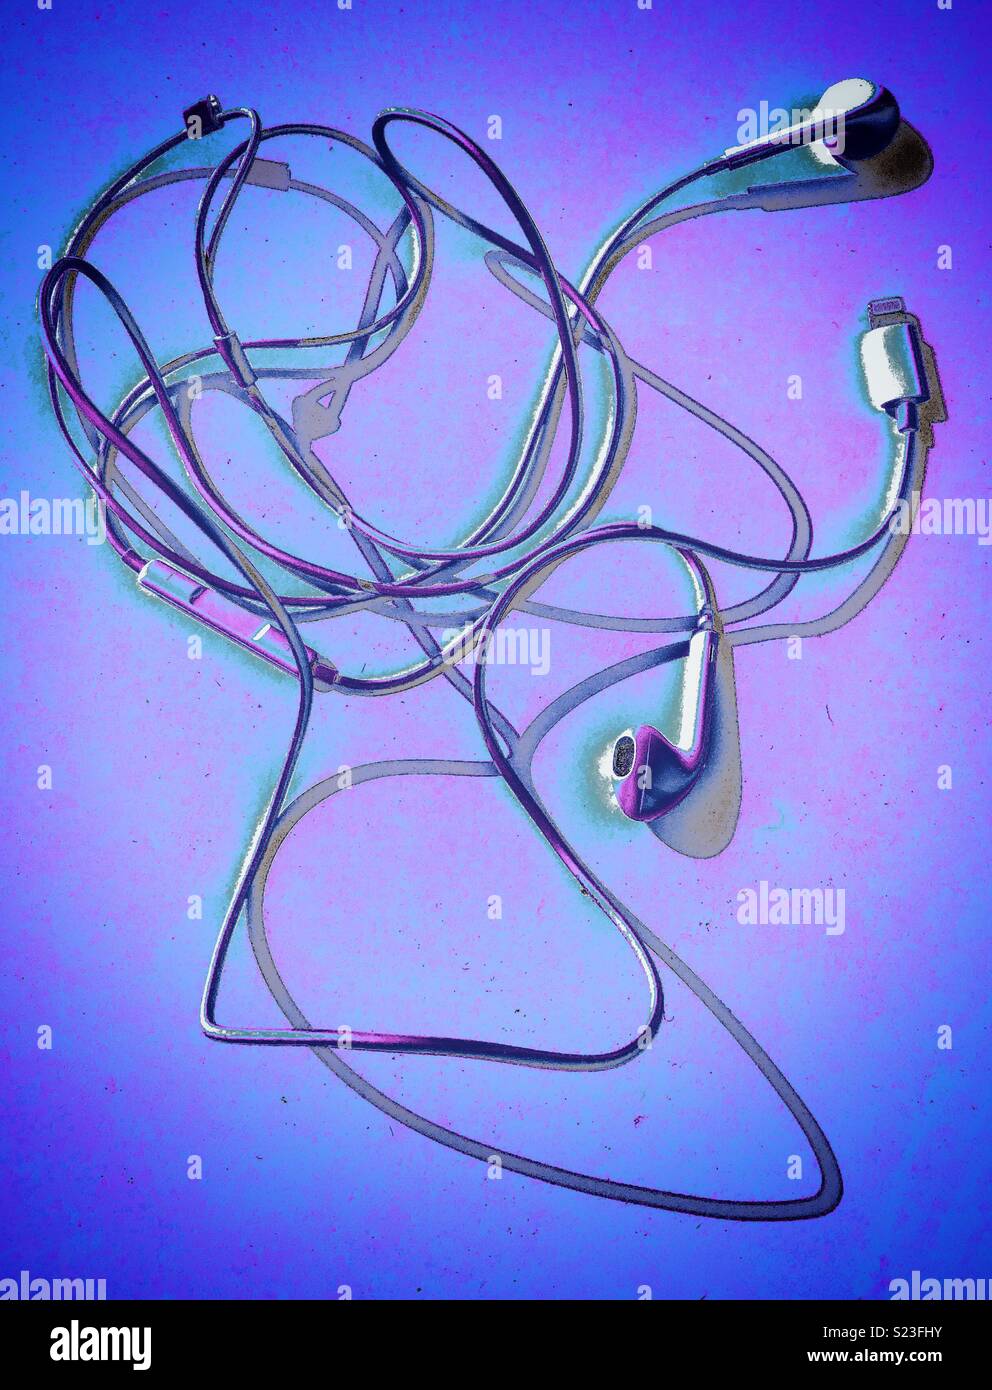 Tangled up headphones for iPhone Stock Photo